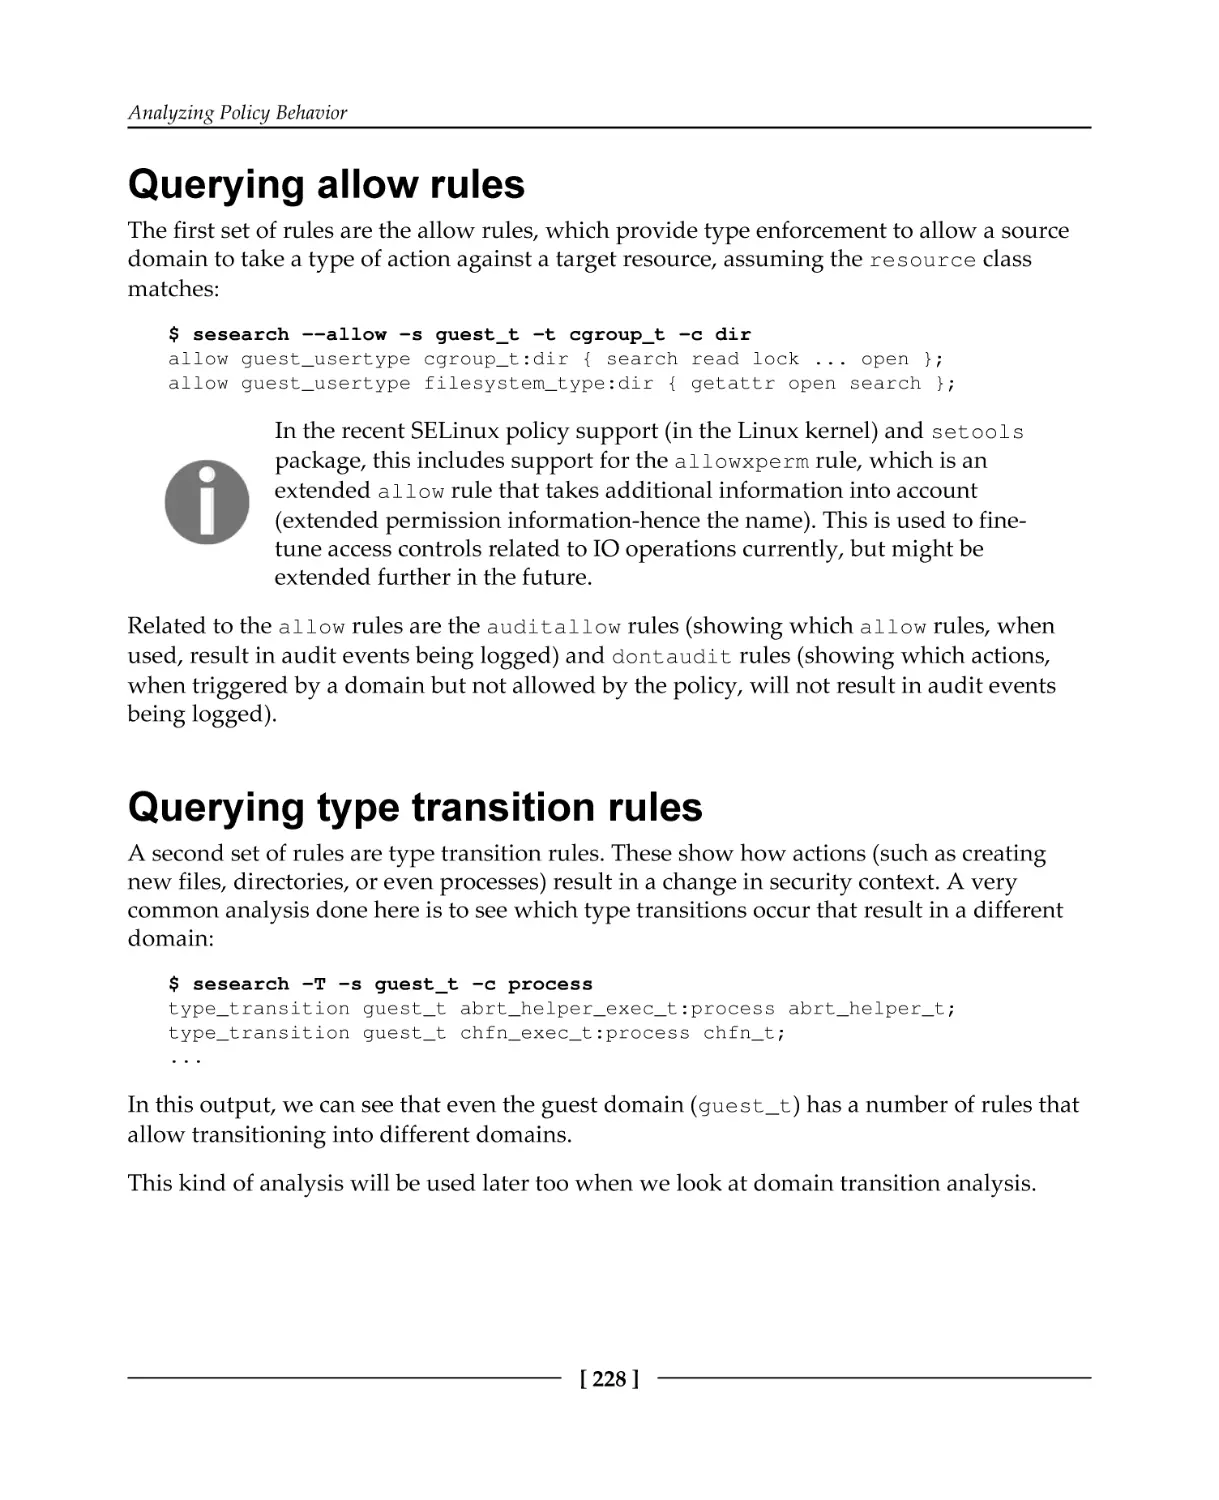 Querying allow rules
Querying type transition rules